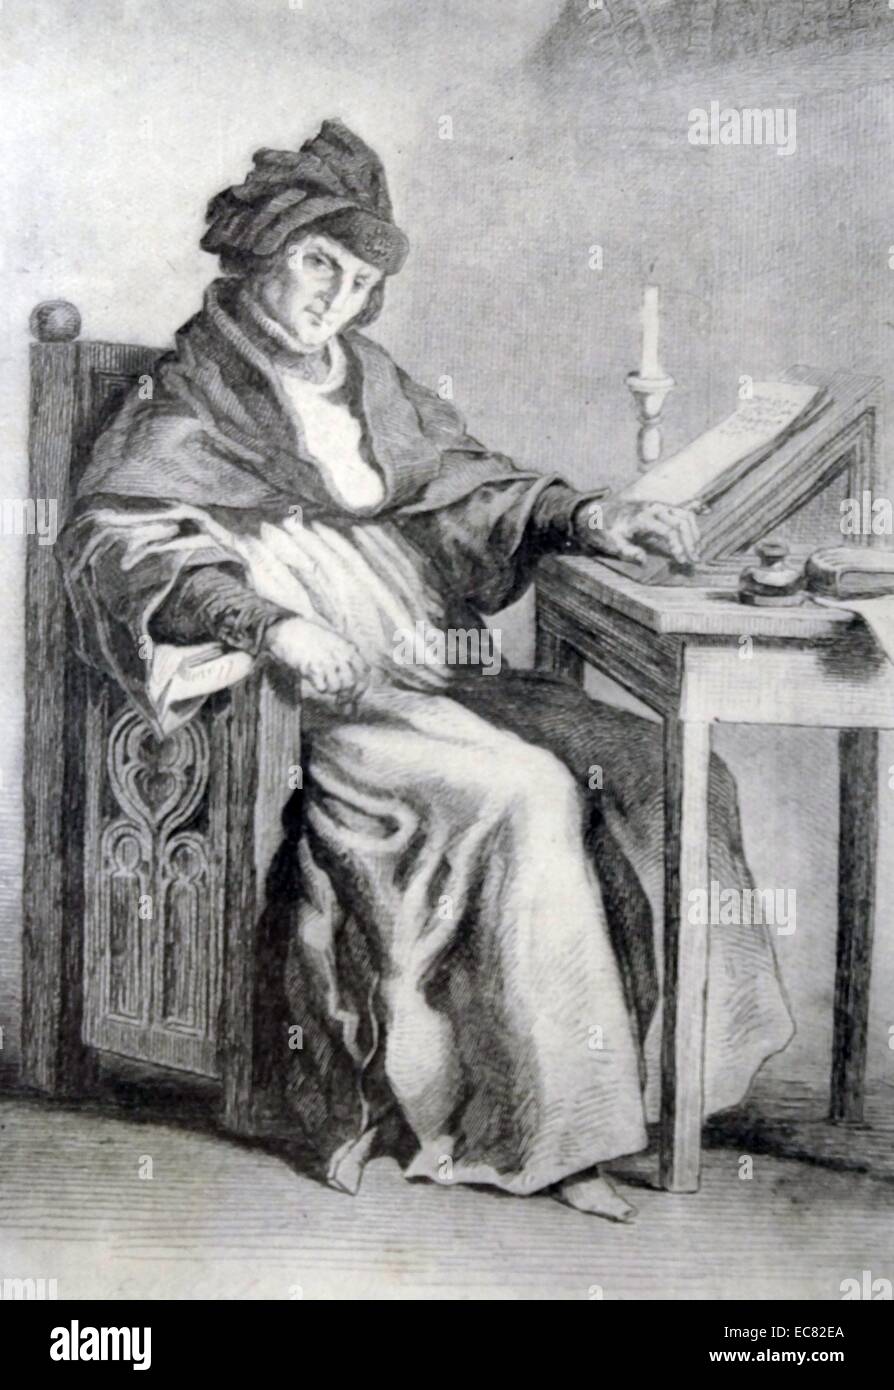 Engraving of Jean Froissart (1337-1405) medieval French author. Dated 14th Century Stock Photo